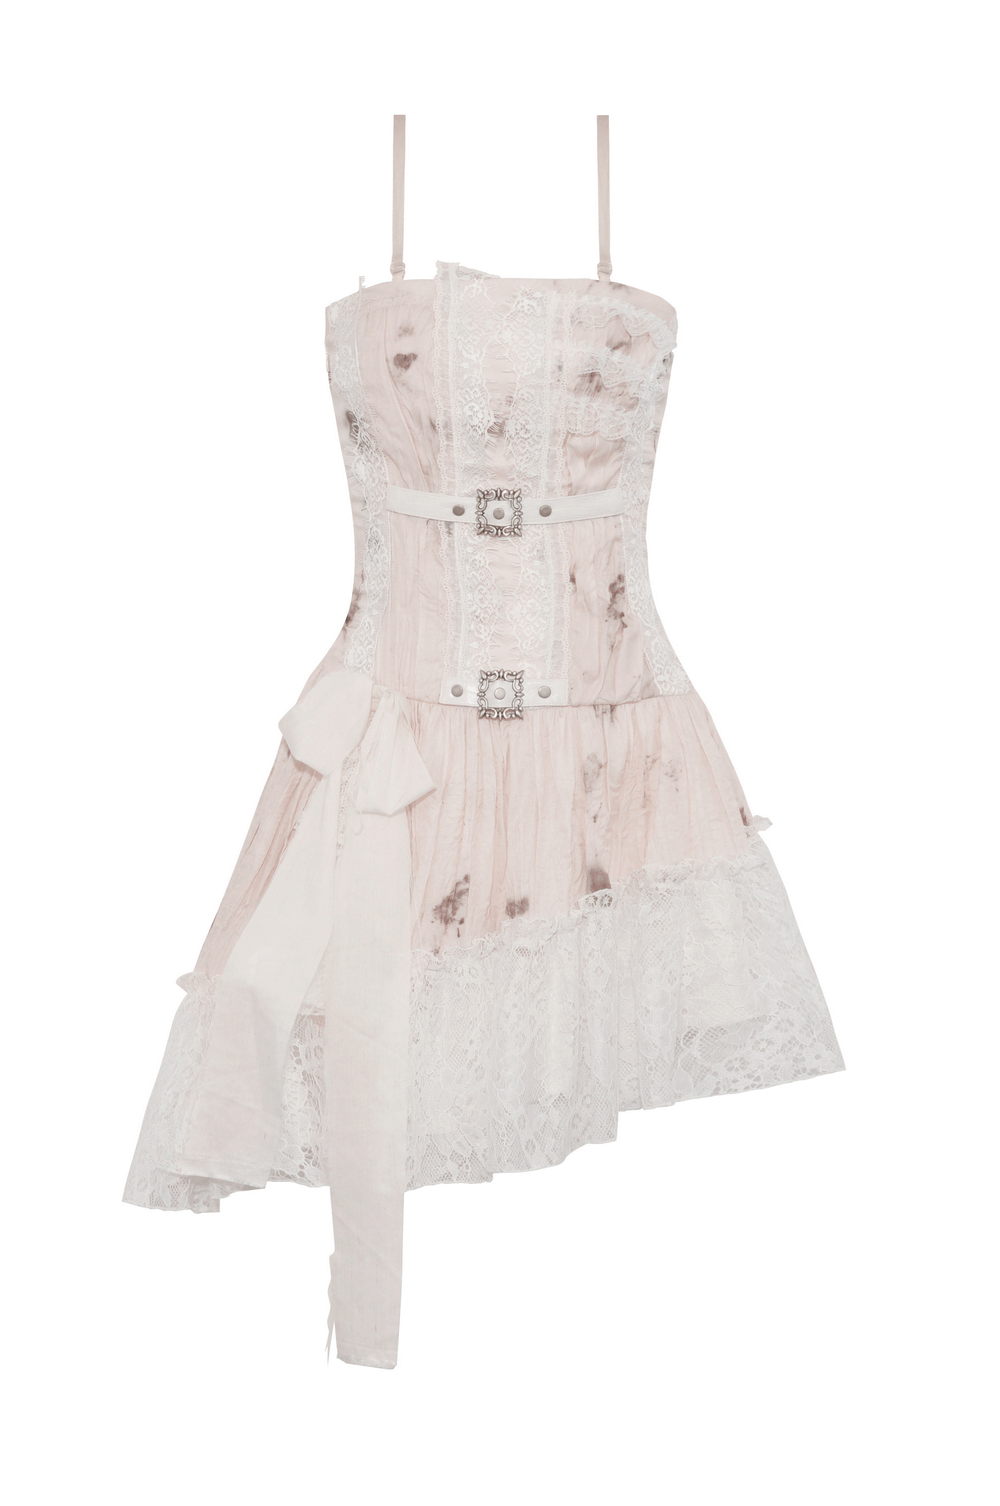 Steampunk Asymmetrical Lace Dress with Tie Dye Accents